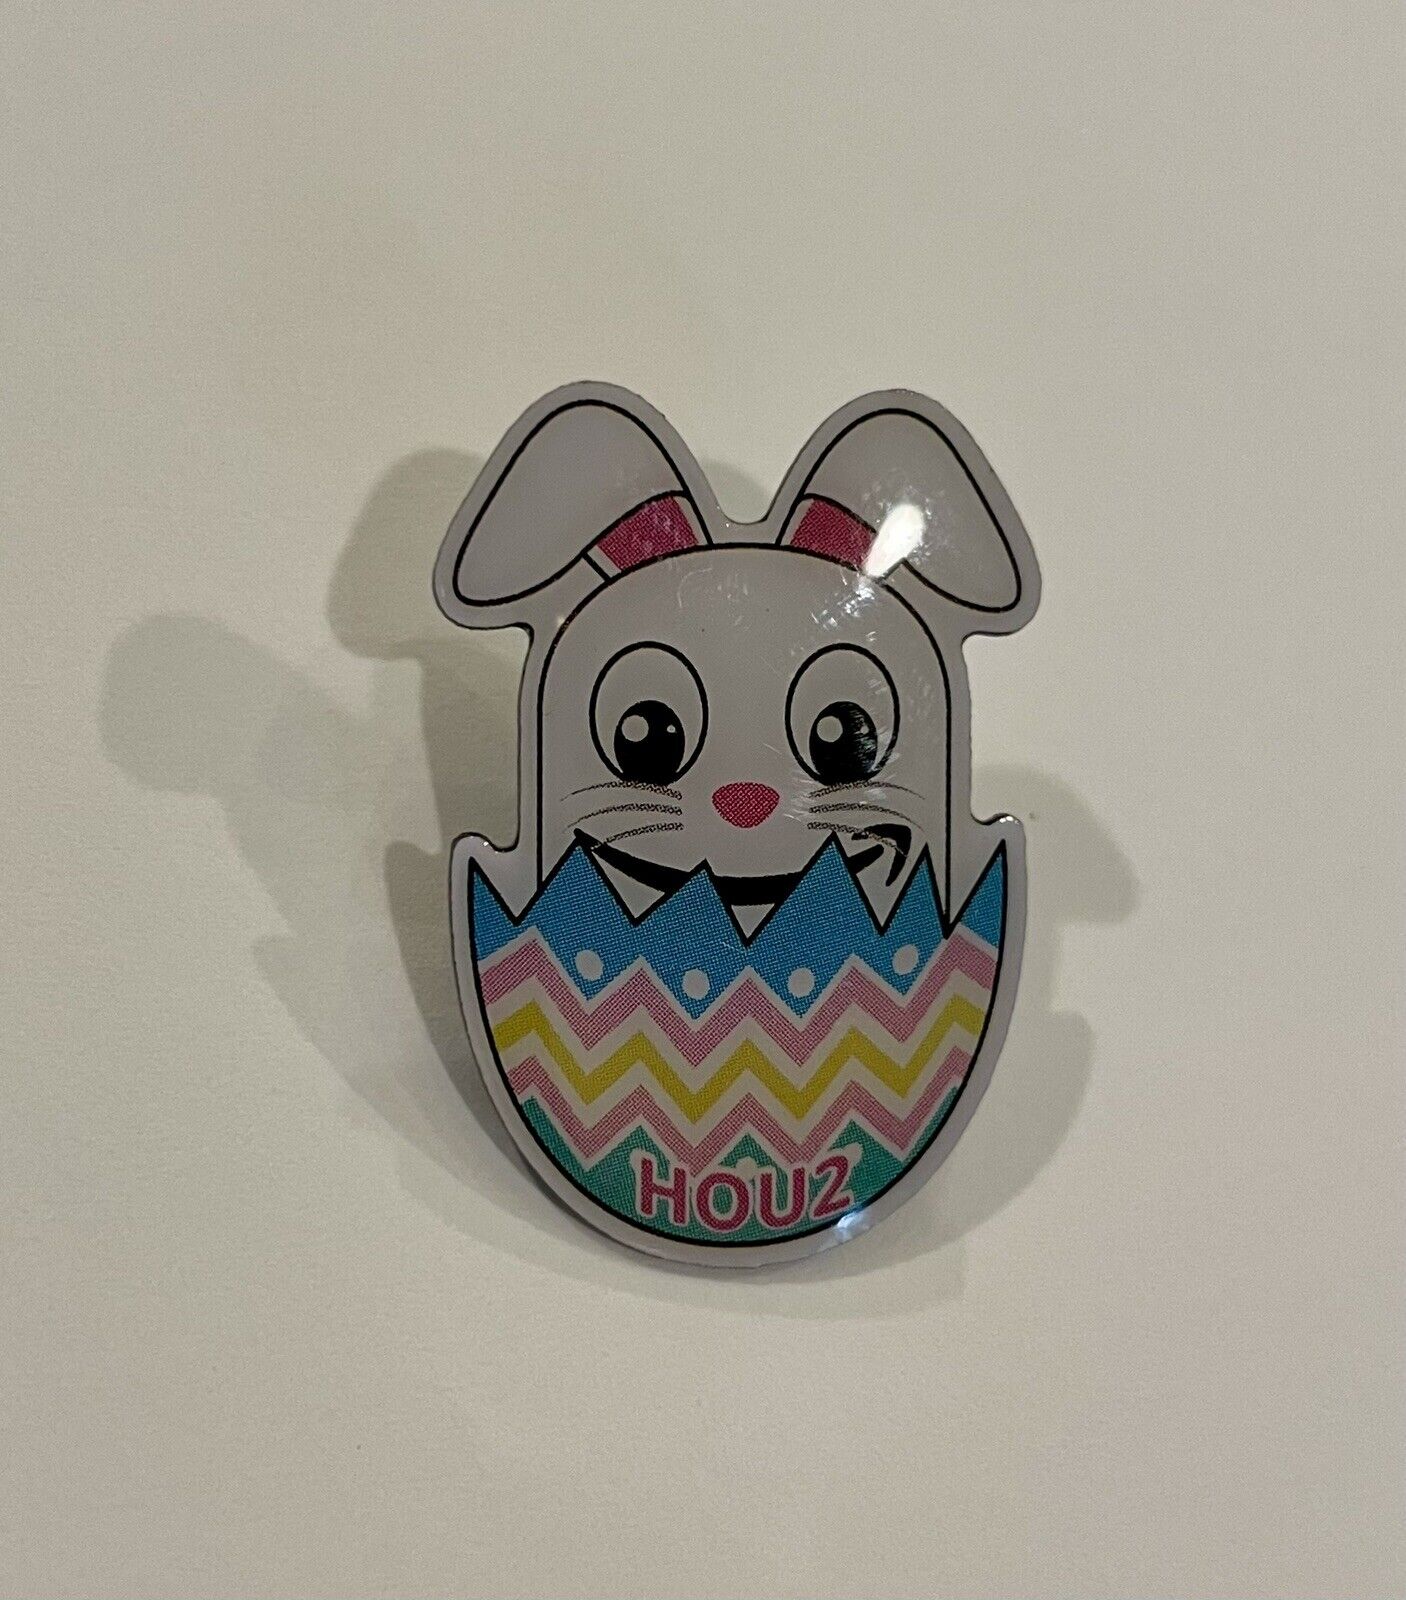 Amazon peccy pin - Easter Bunny - Painted Egg - HOU2